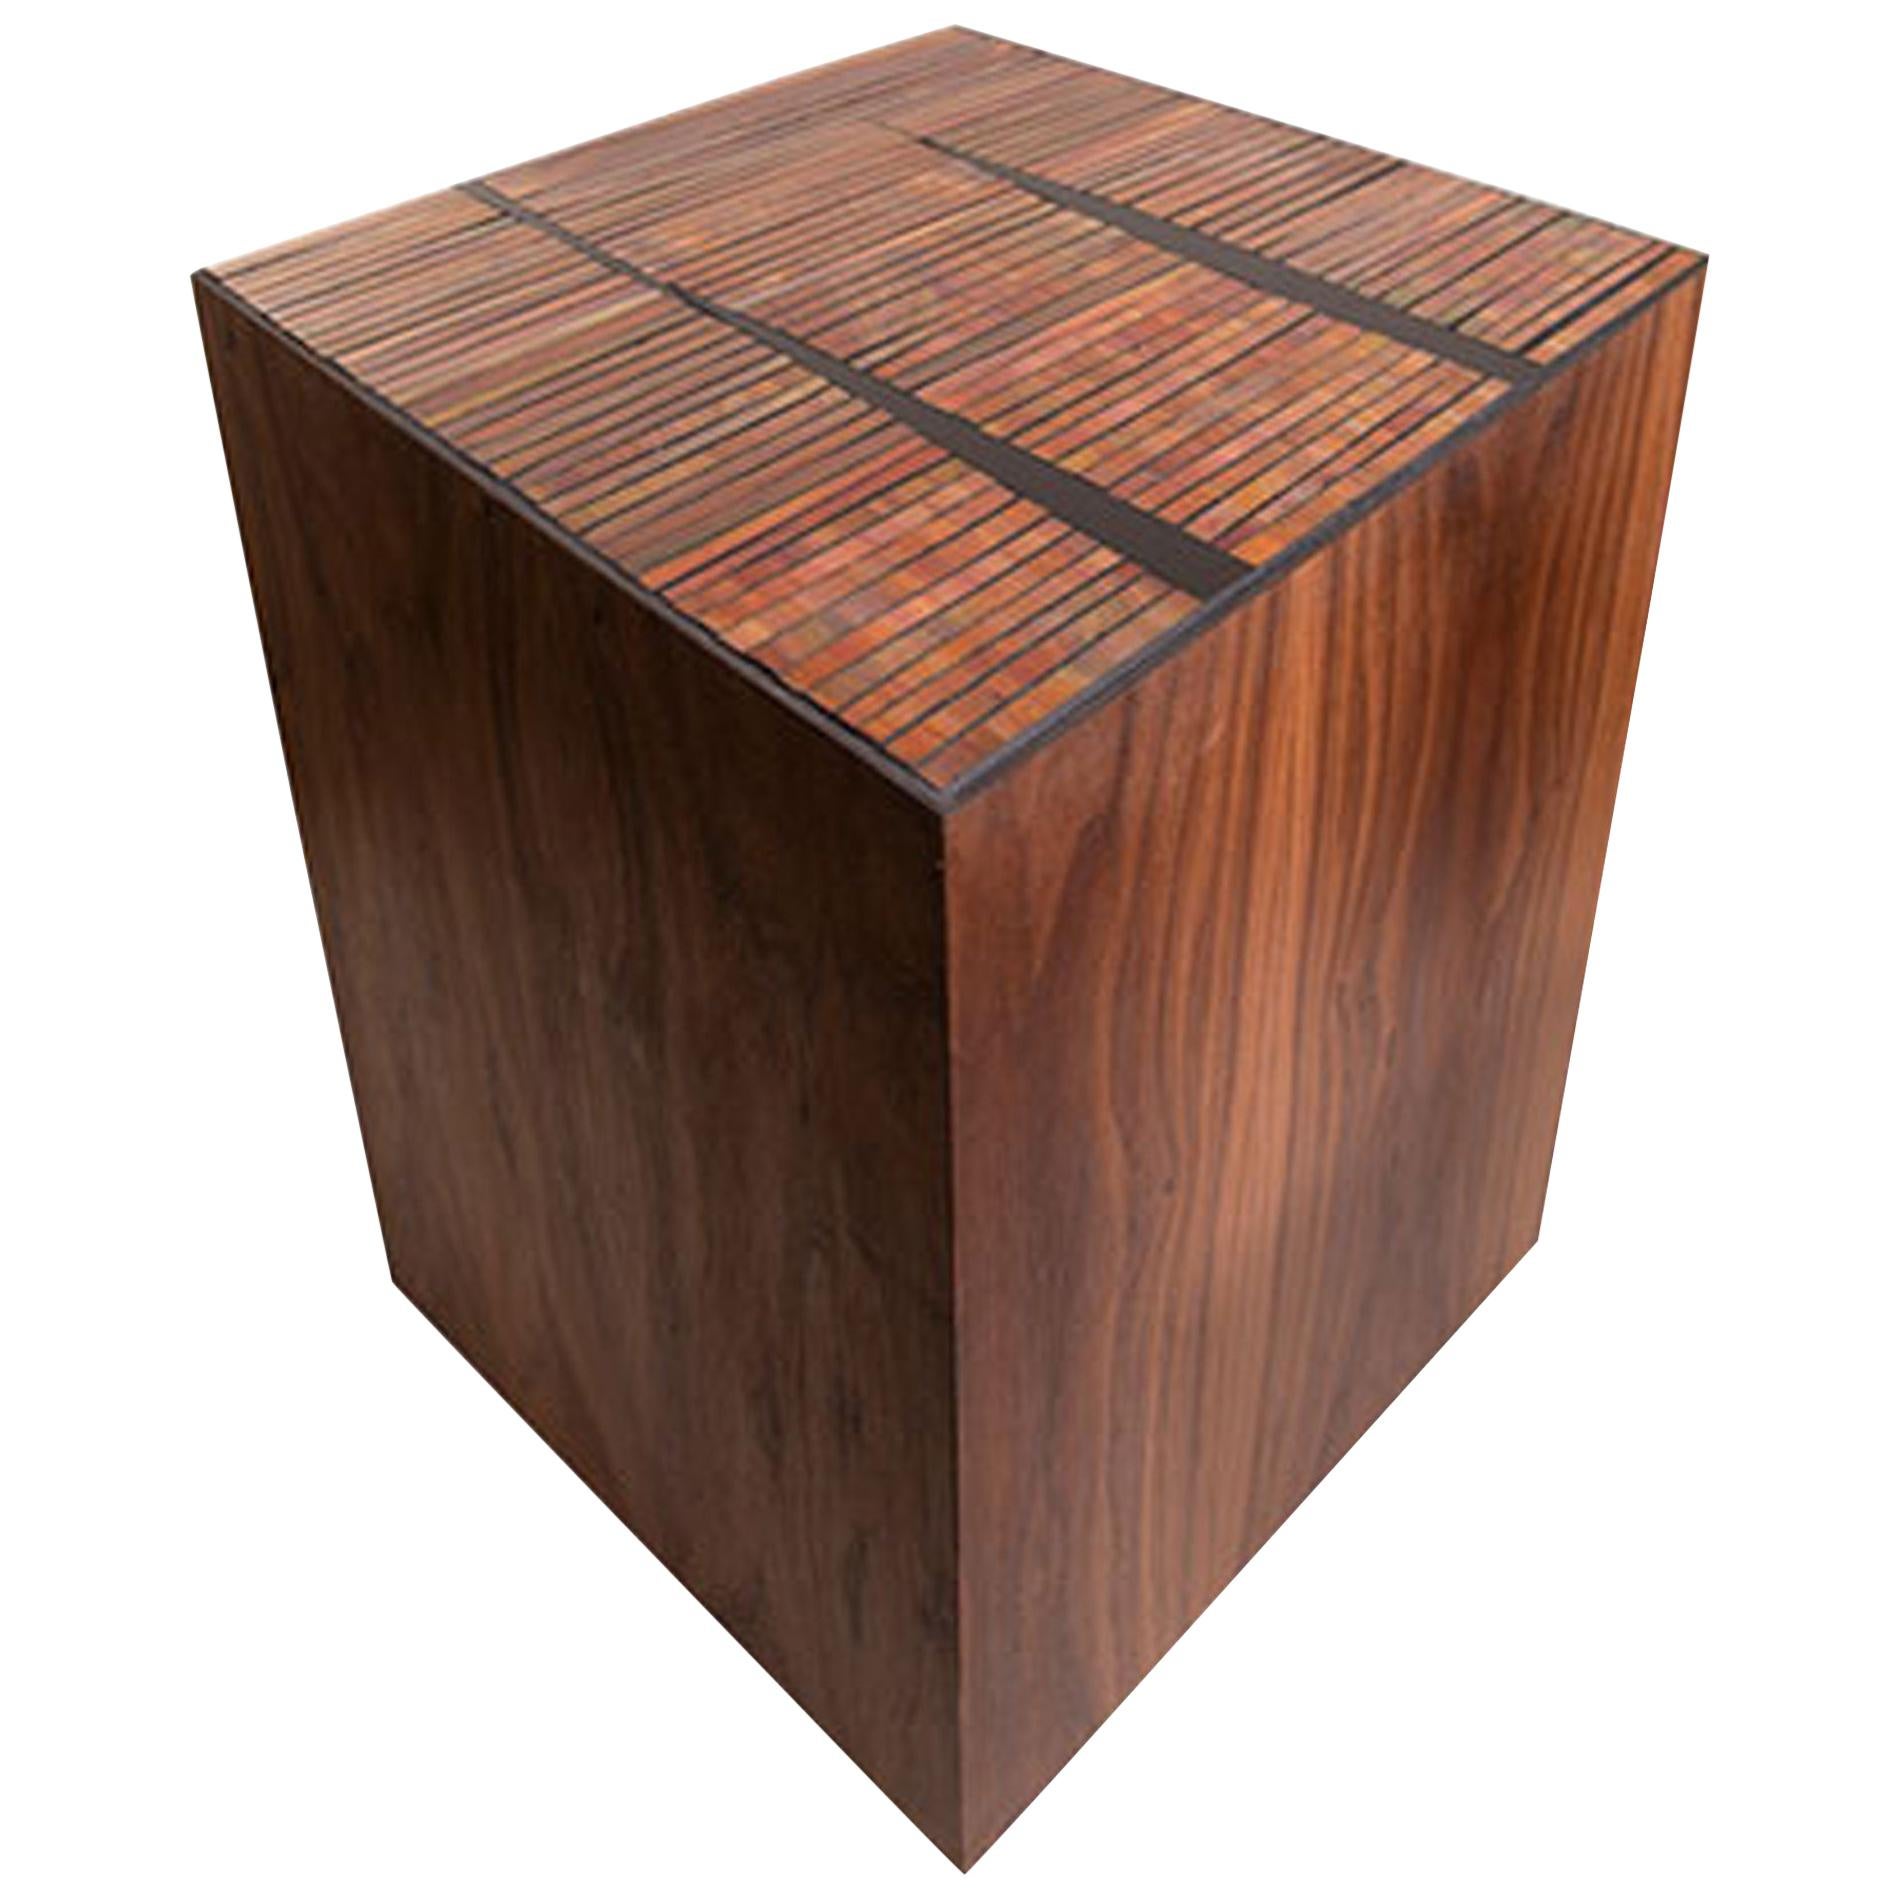 Customizable Natura Brown Walnut Pedestal in Sycamore Mosaic by Ercole Home